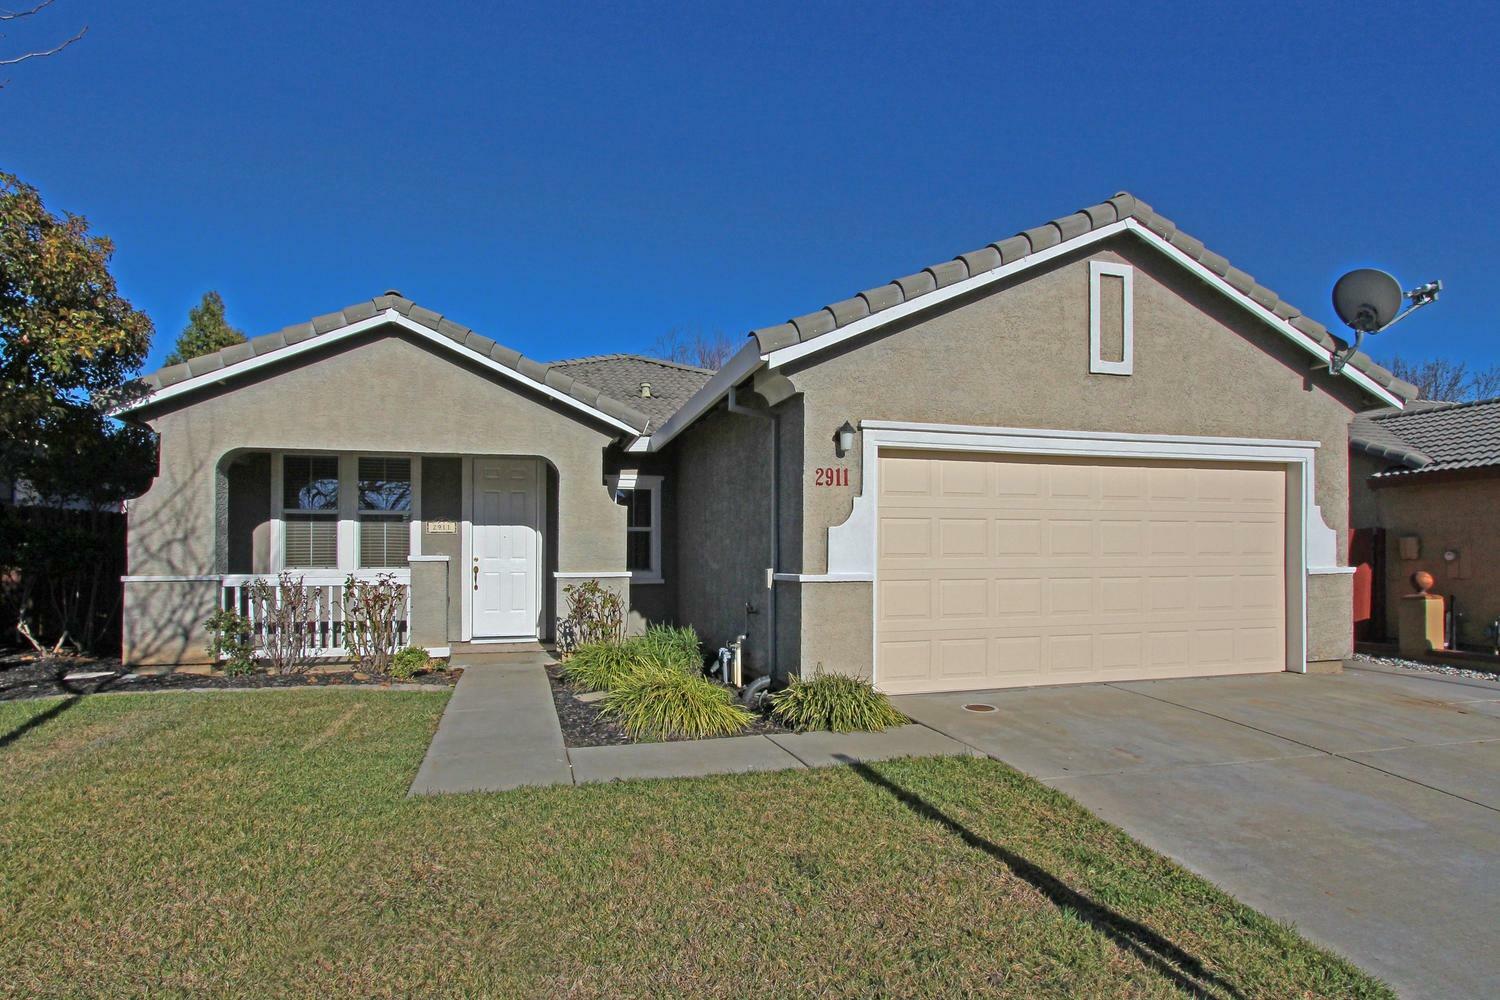 Property Photo:  2911 Red Clover Way  CA 95648 